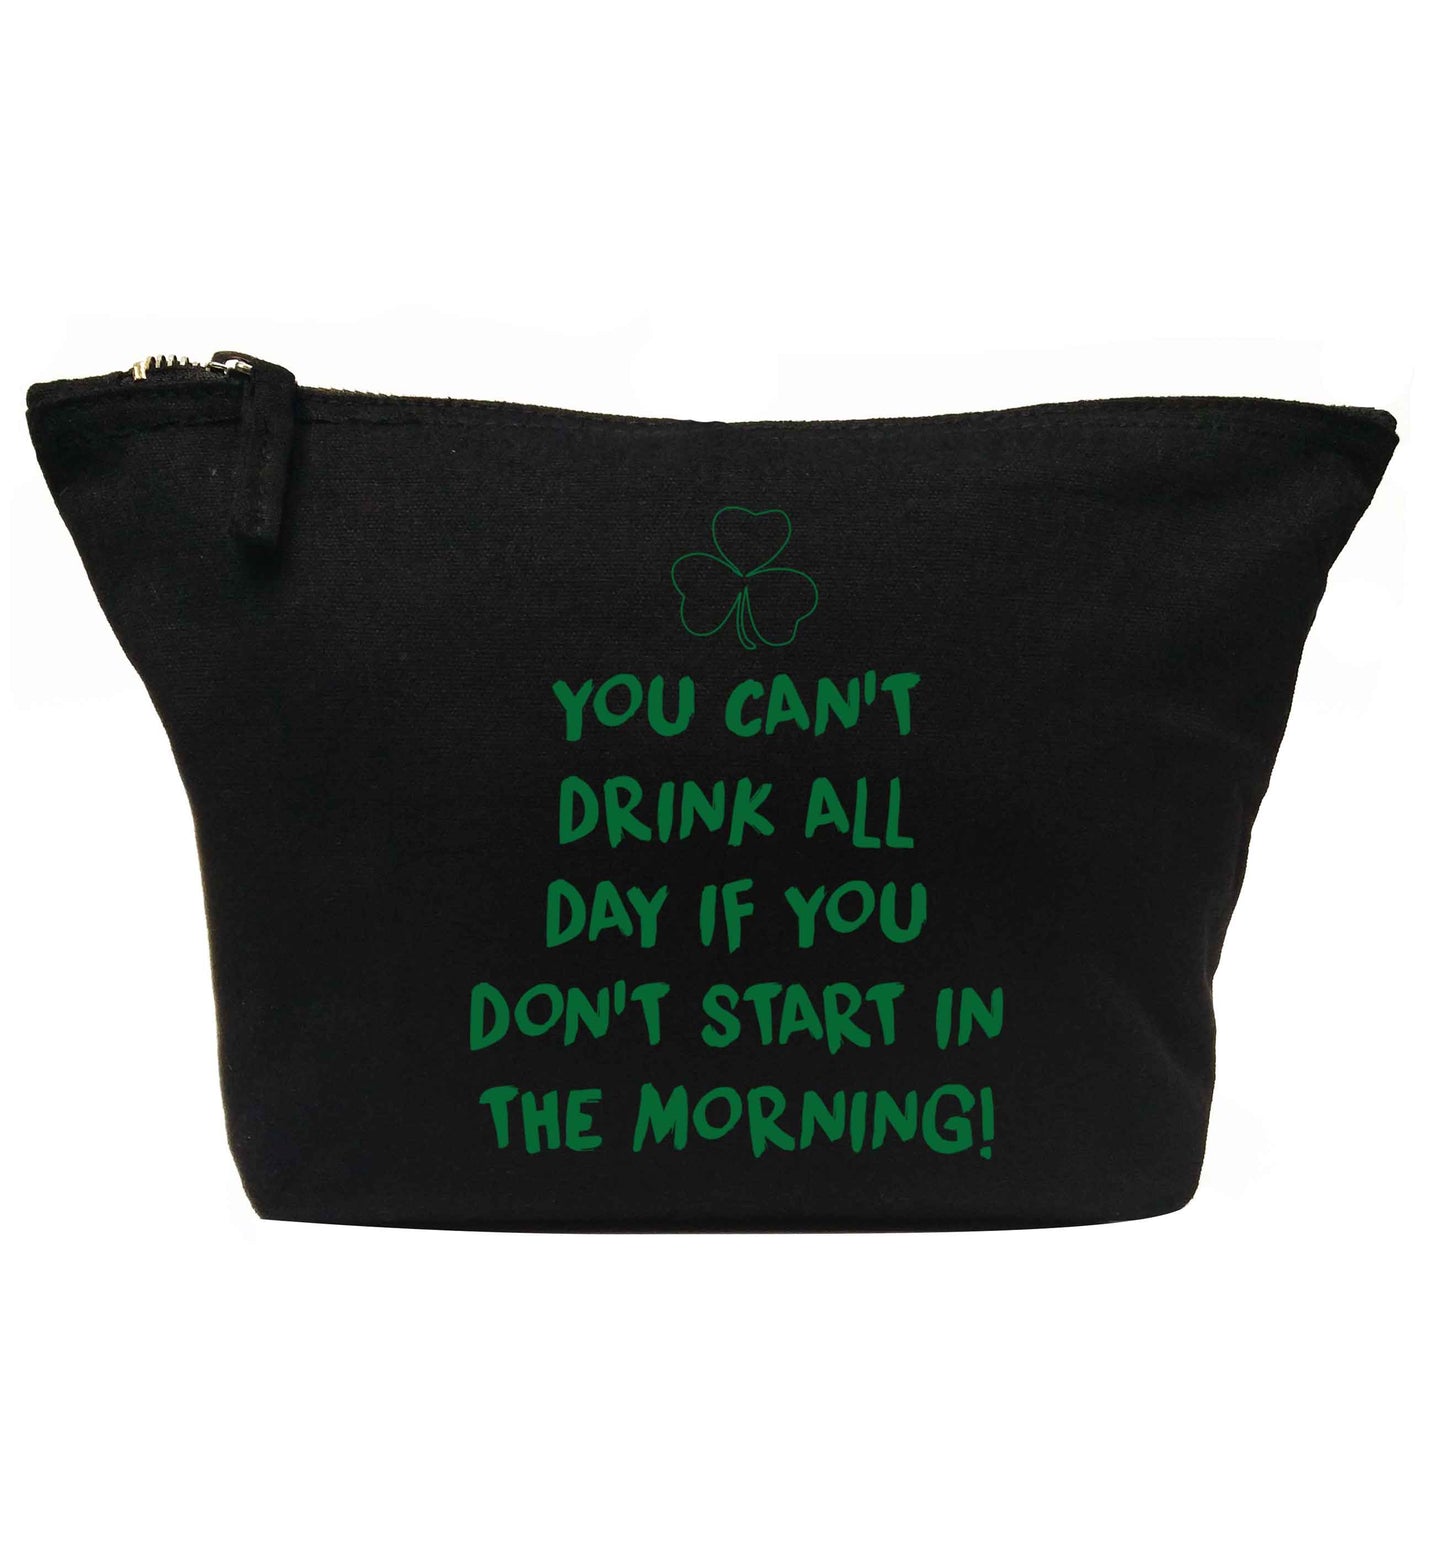 You can't drink all day if you don't start in the morning | Makeup / wash bag